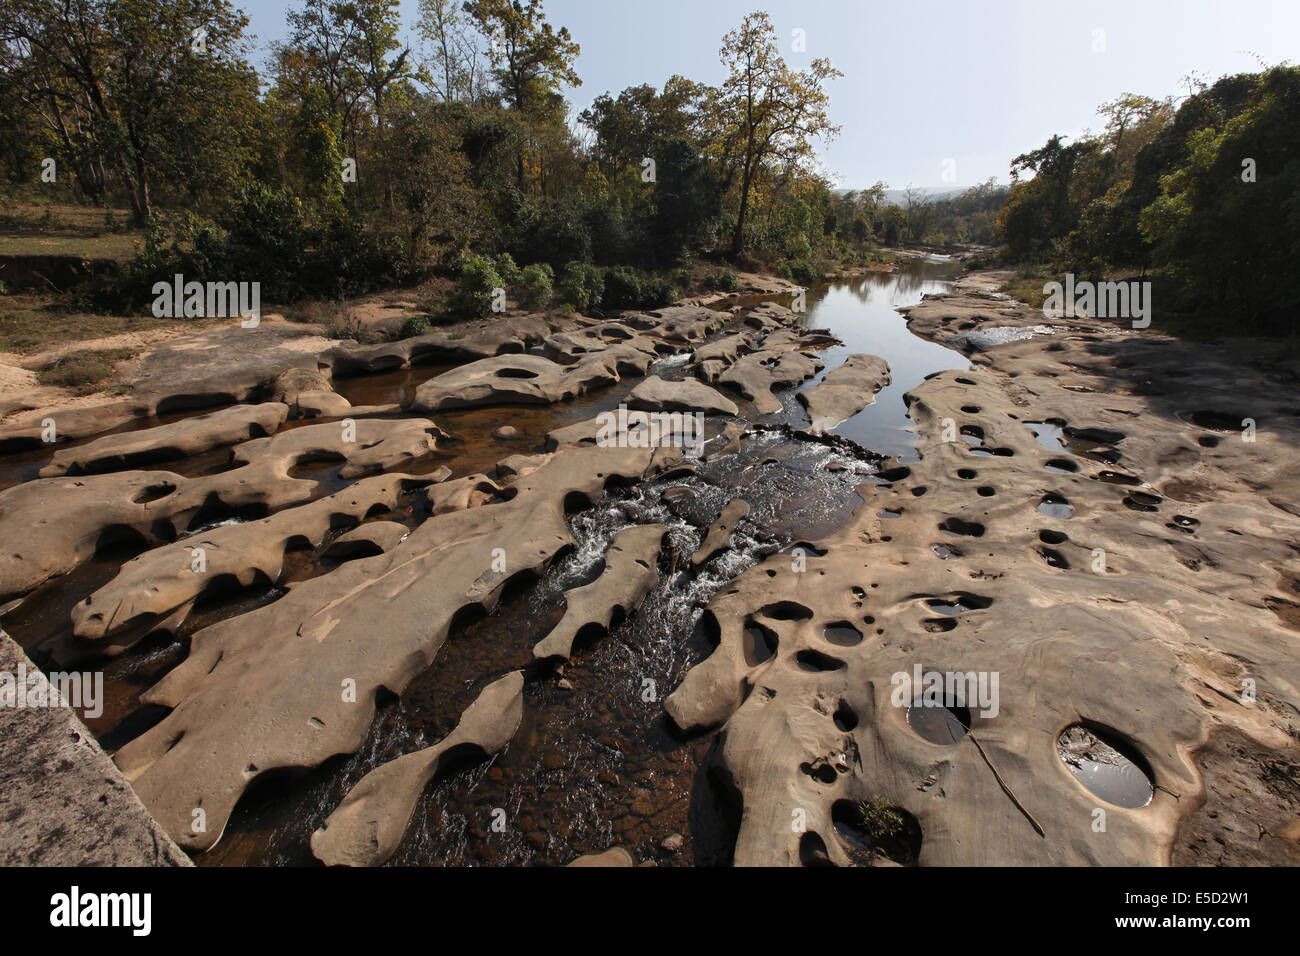 Landscape of rocks with pot holes, Chattisgadh, India Stock Photo